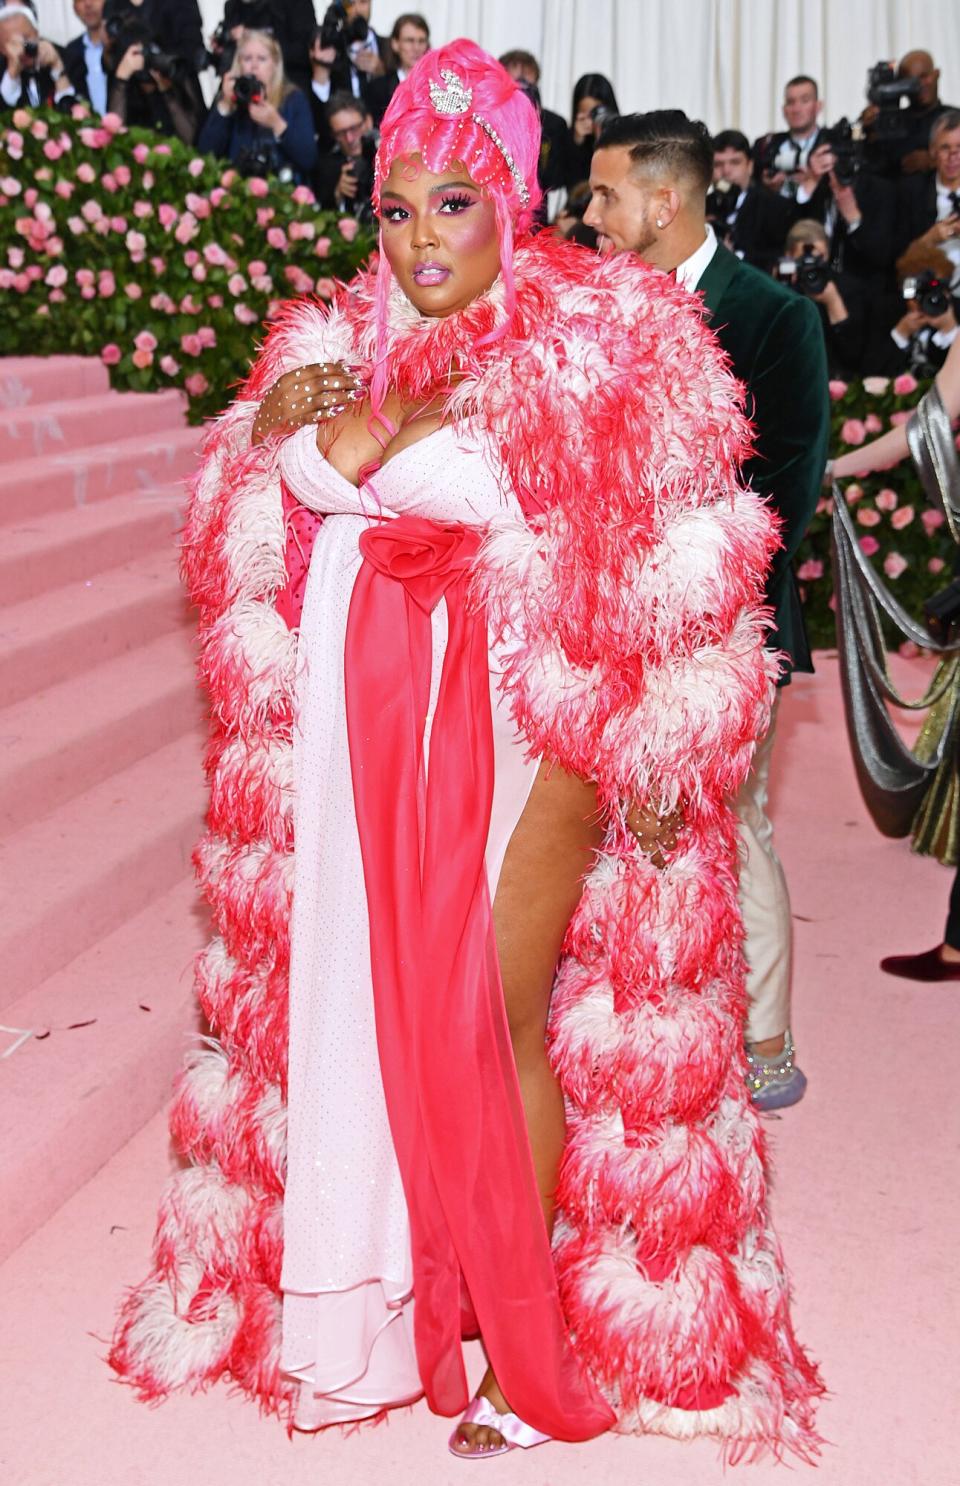 Lizzo attends The 2019 Met Gala Celebrating Camp: Notes on Fashion at Metropolitan Museum of Art on May 06, 2019 in New York City